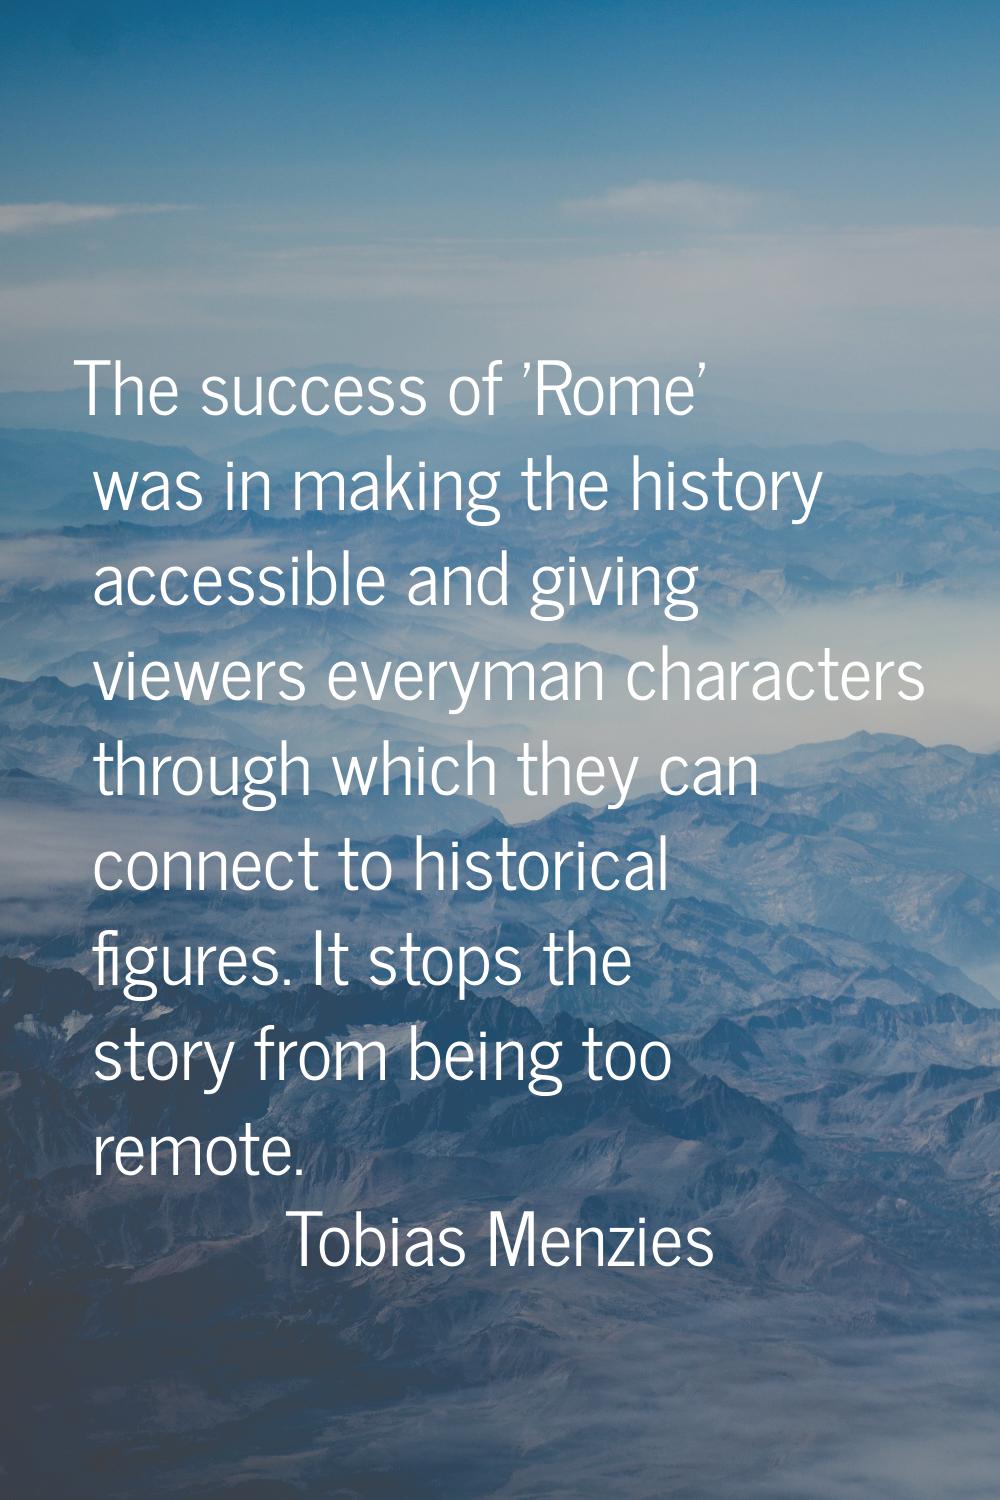 The success of 'Rome' was in making the history accessible and giving viewers everyman characters t